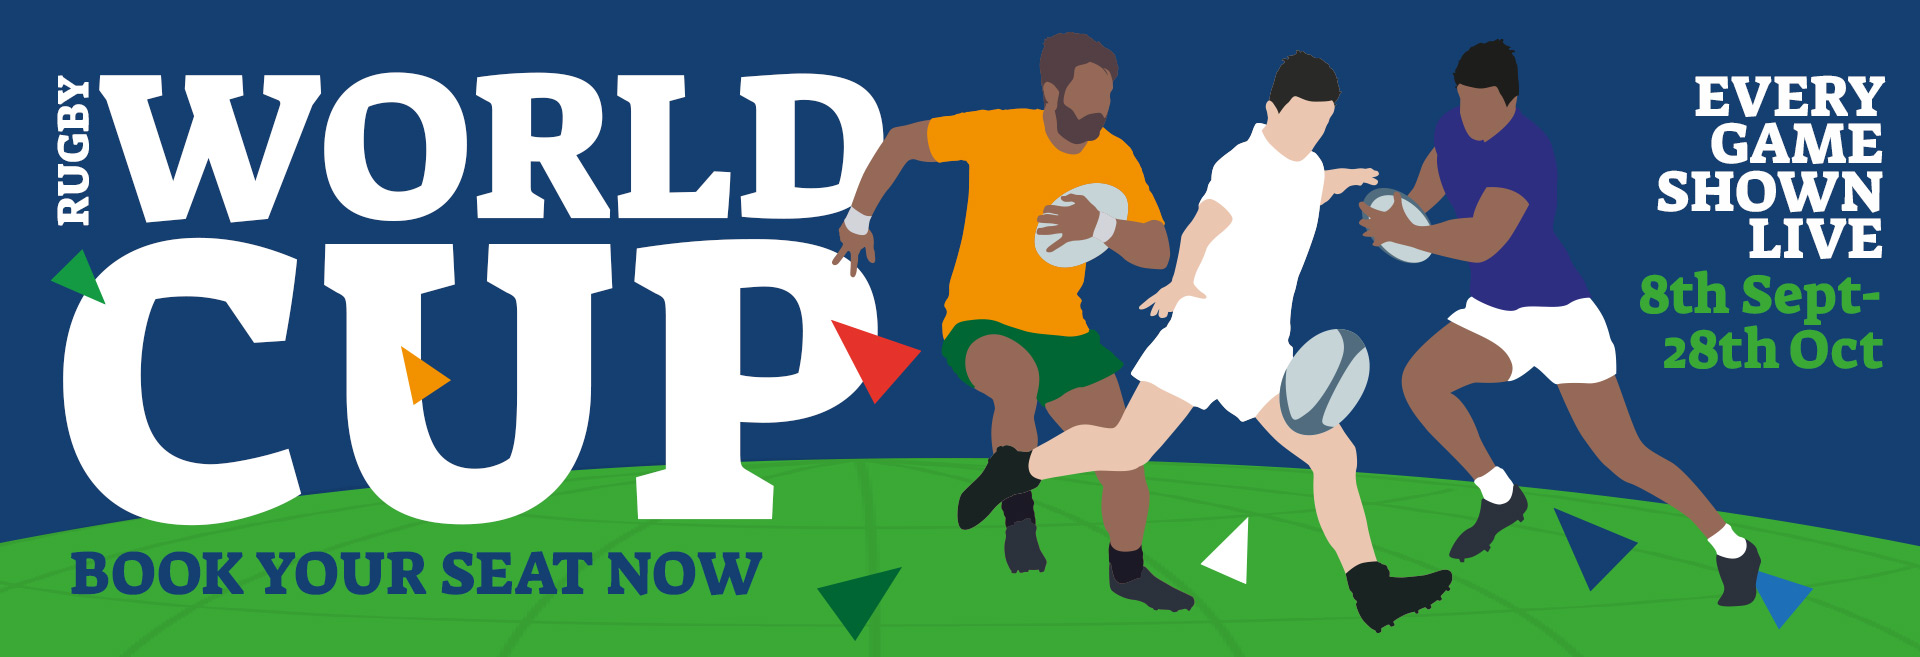 Watch the Rugby World Cup at The Volunteer